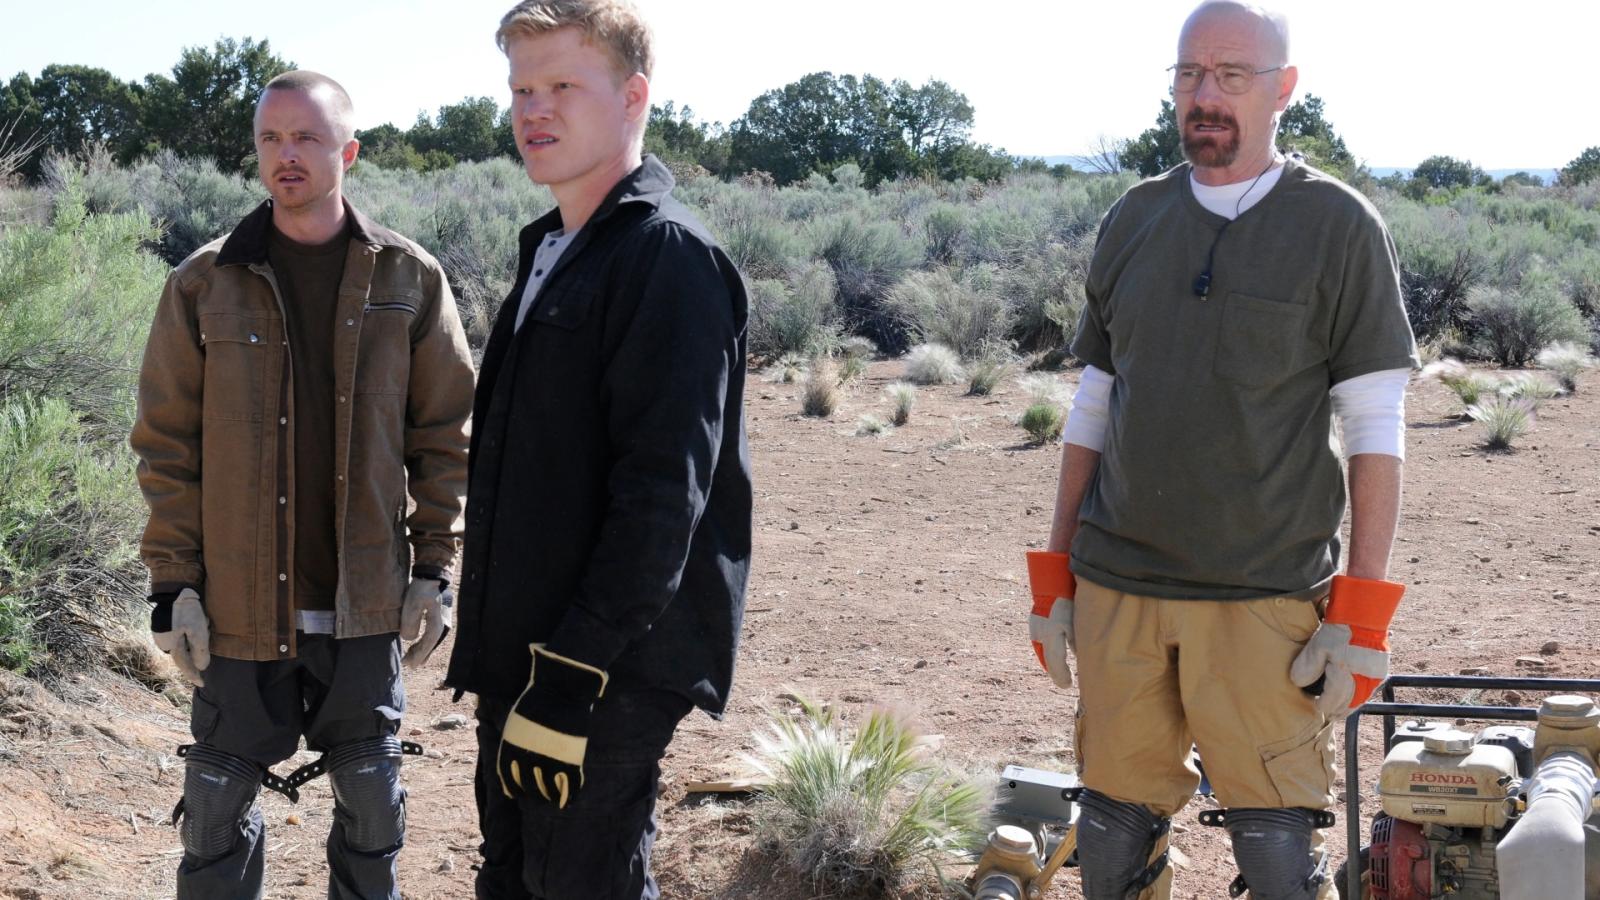 Discover Which Breaking Bad Character Are You Based on Your Zodiac Sign - image 12